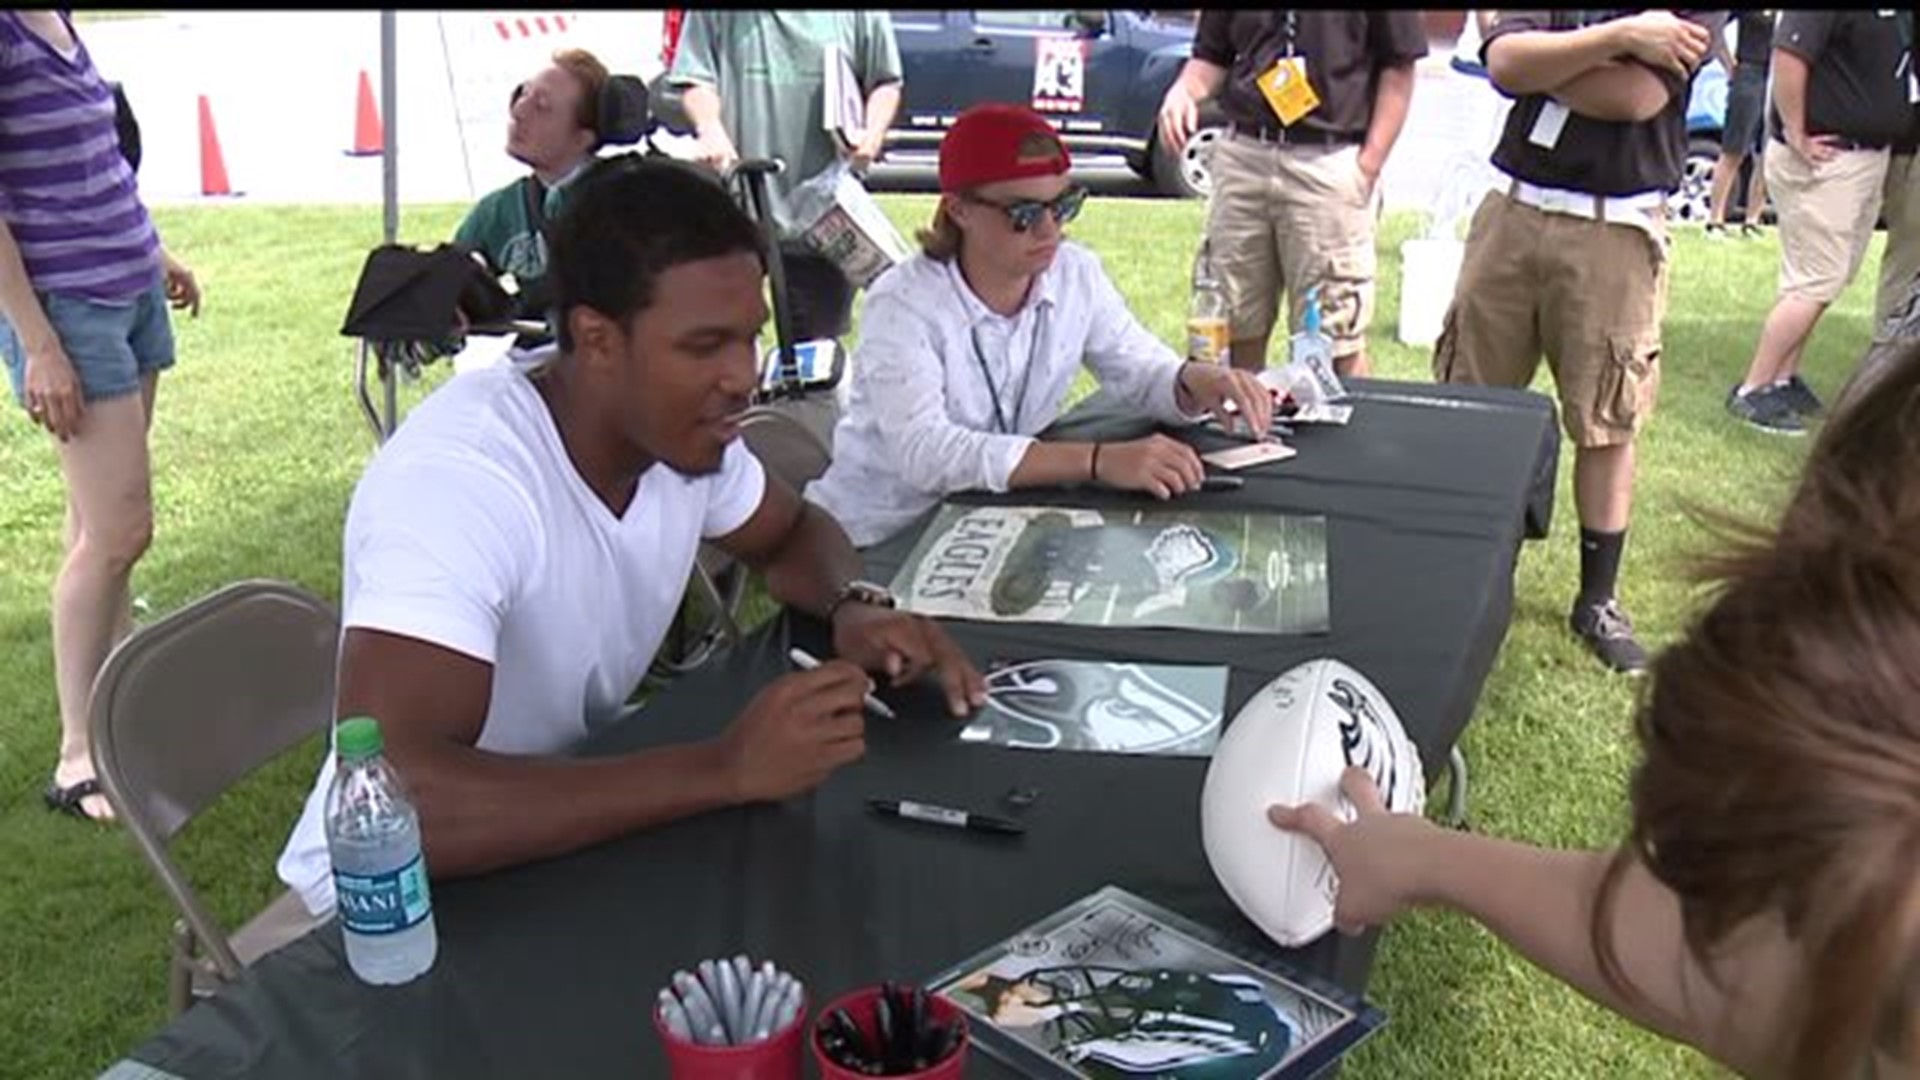 Eagles players at Rockvale Outlets for meet and greet